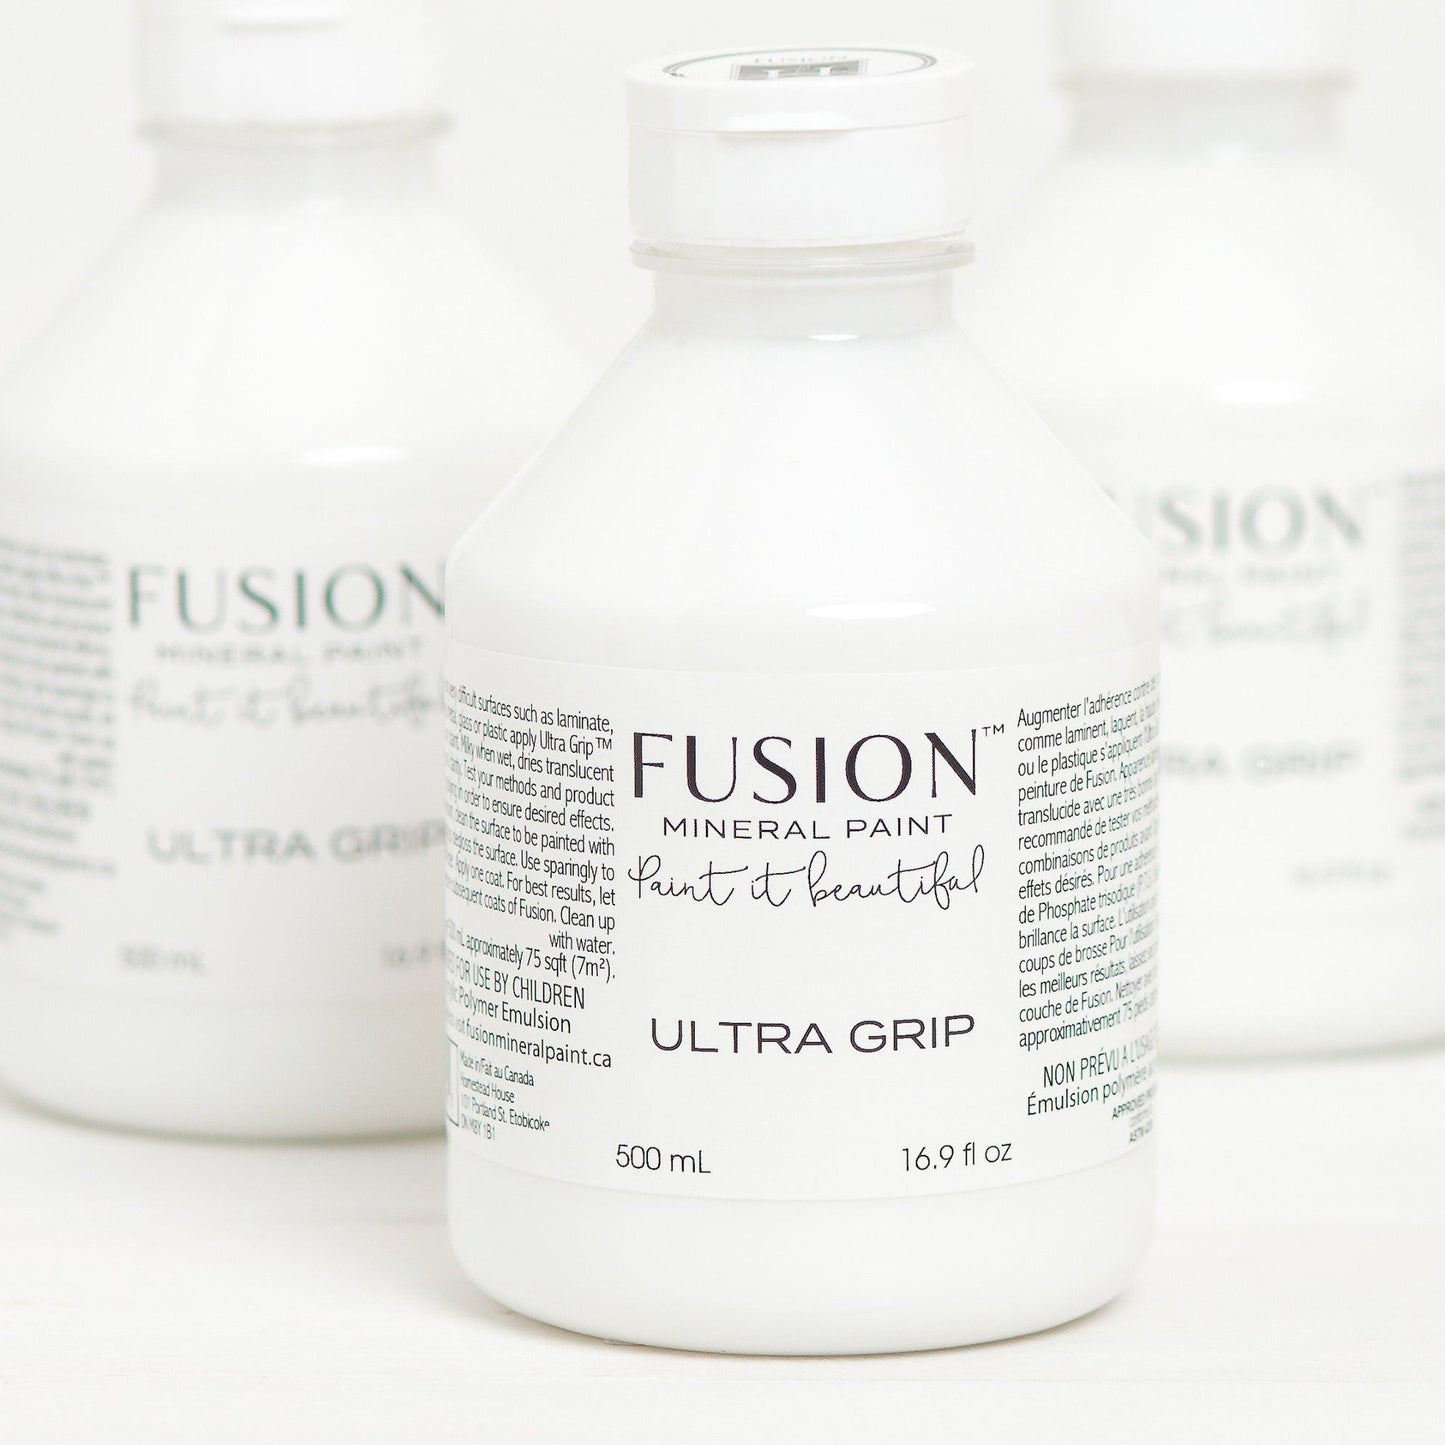 Ultra Grip by Fusion